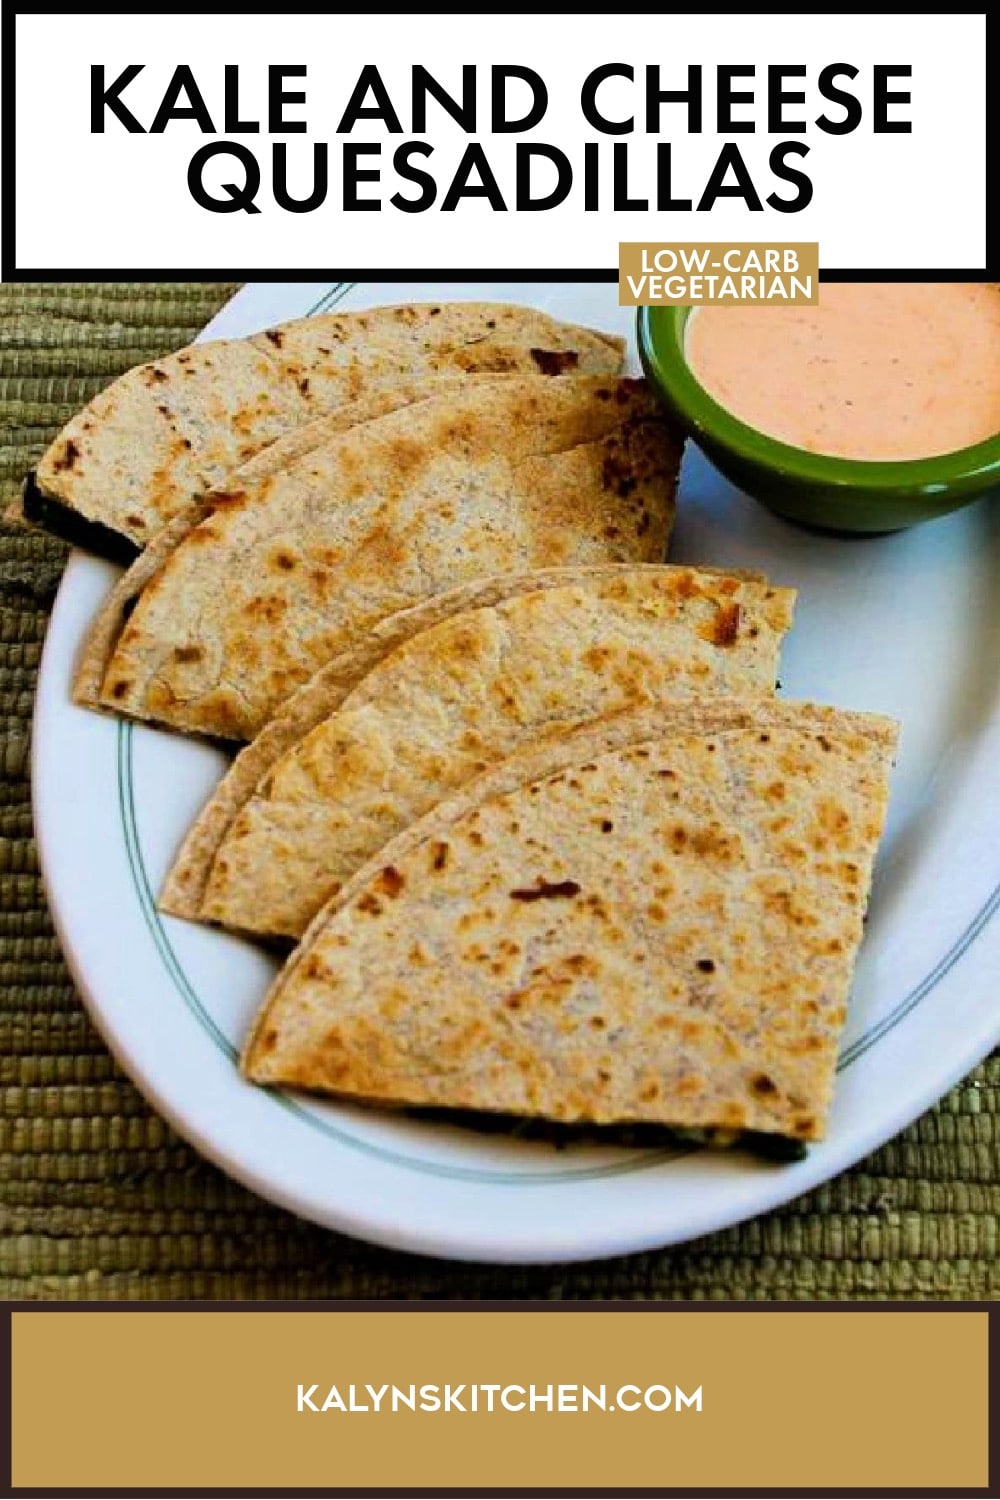 Pinterest image of Kale and Cheese Quesadillas